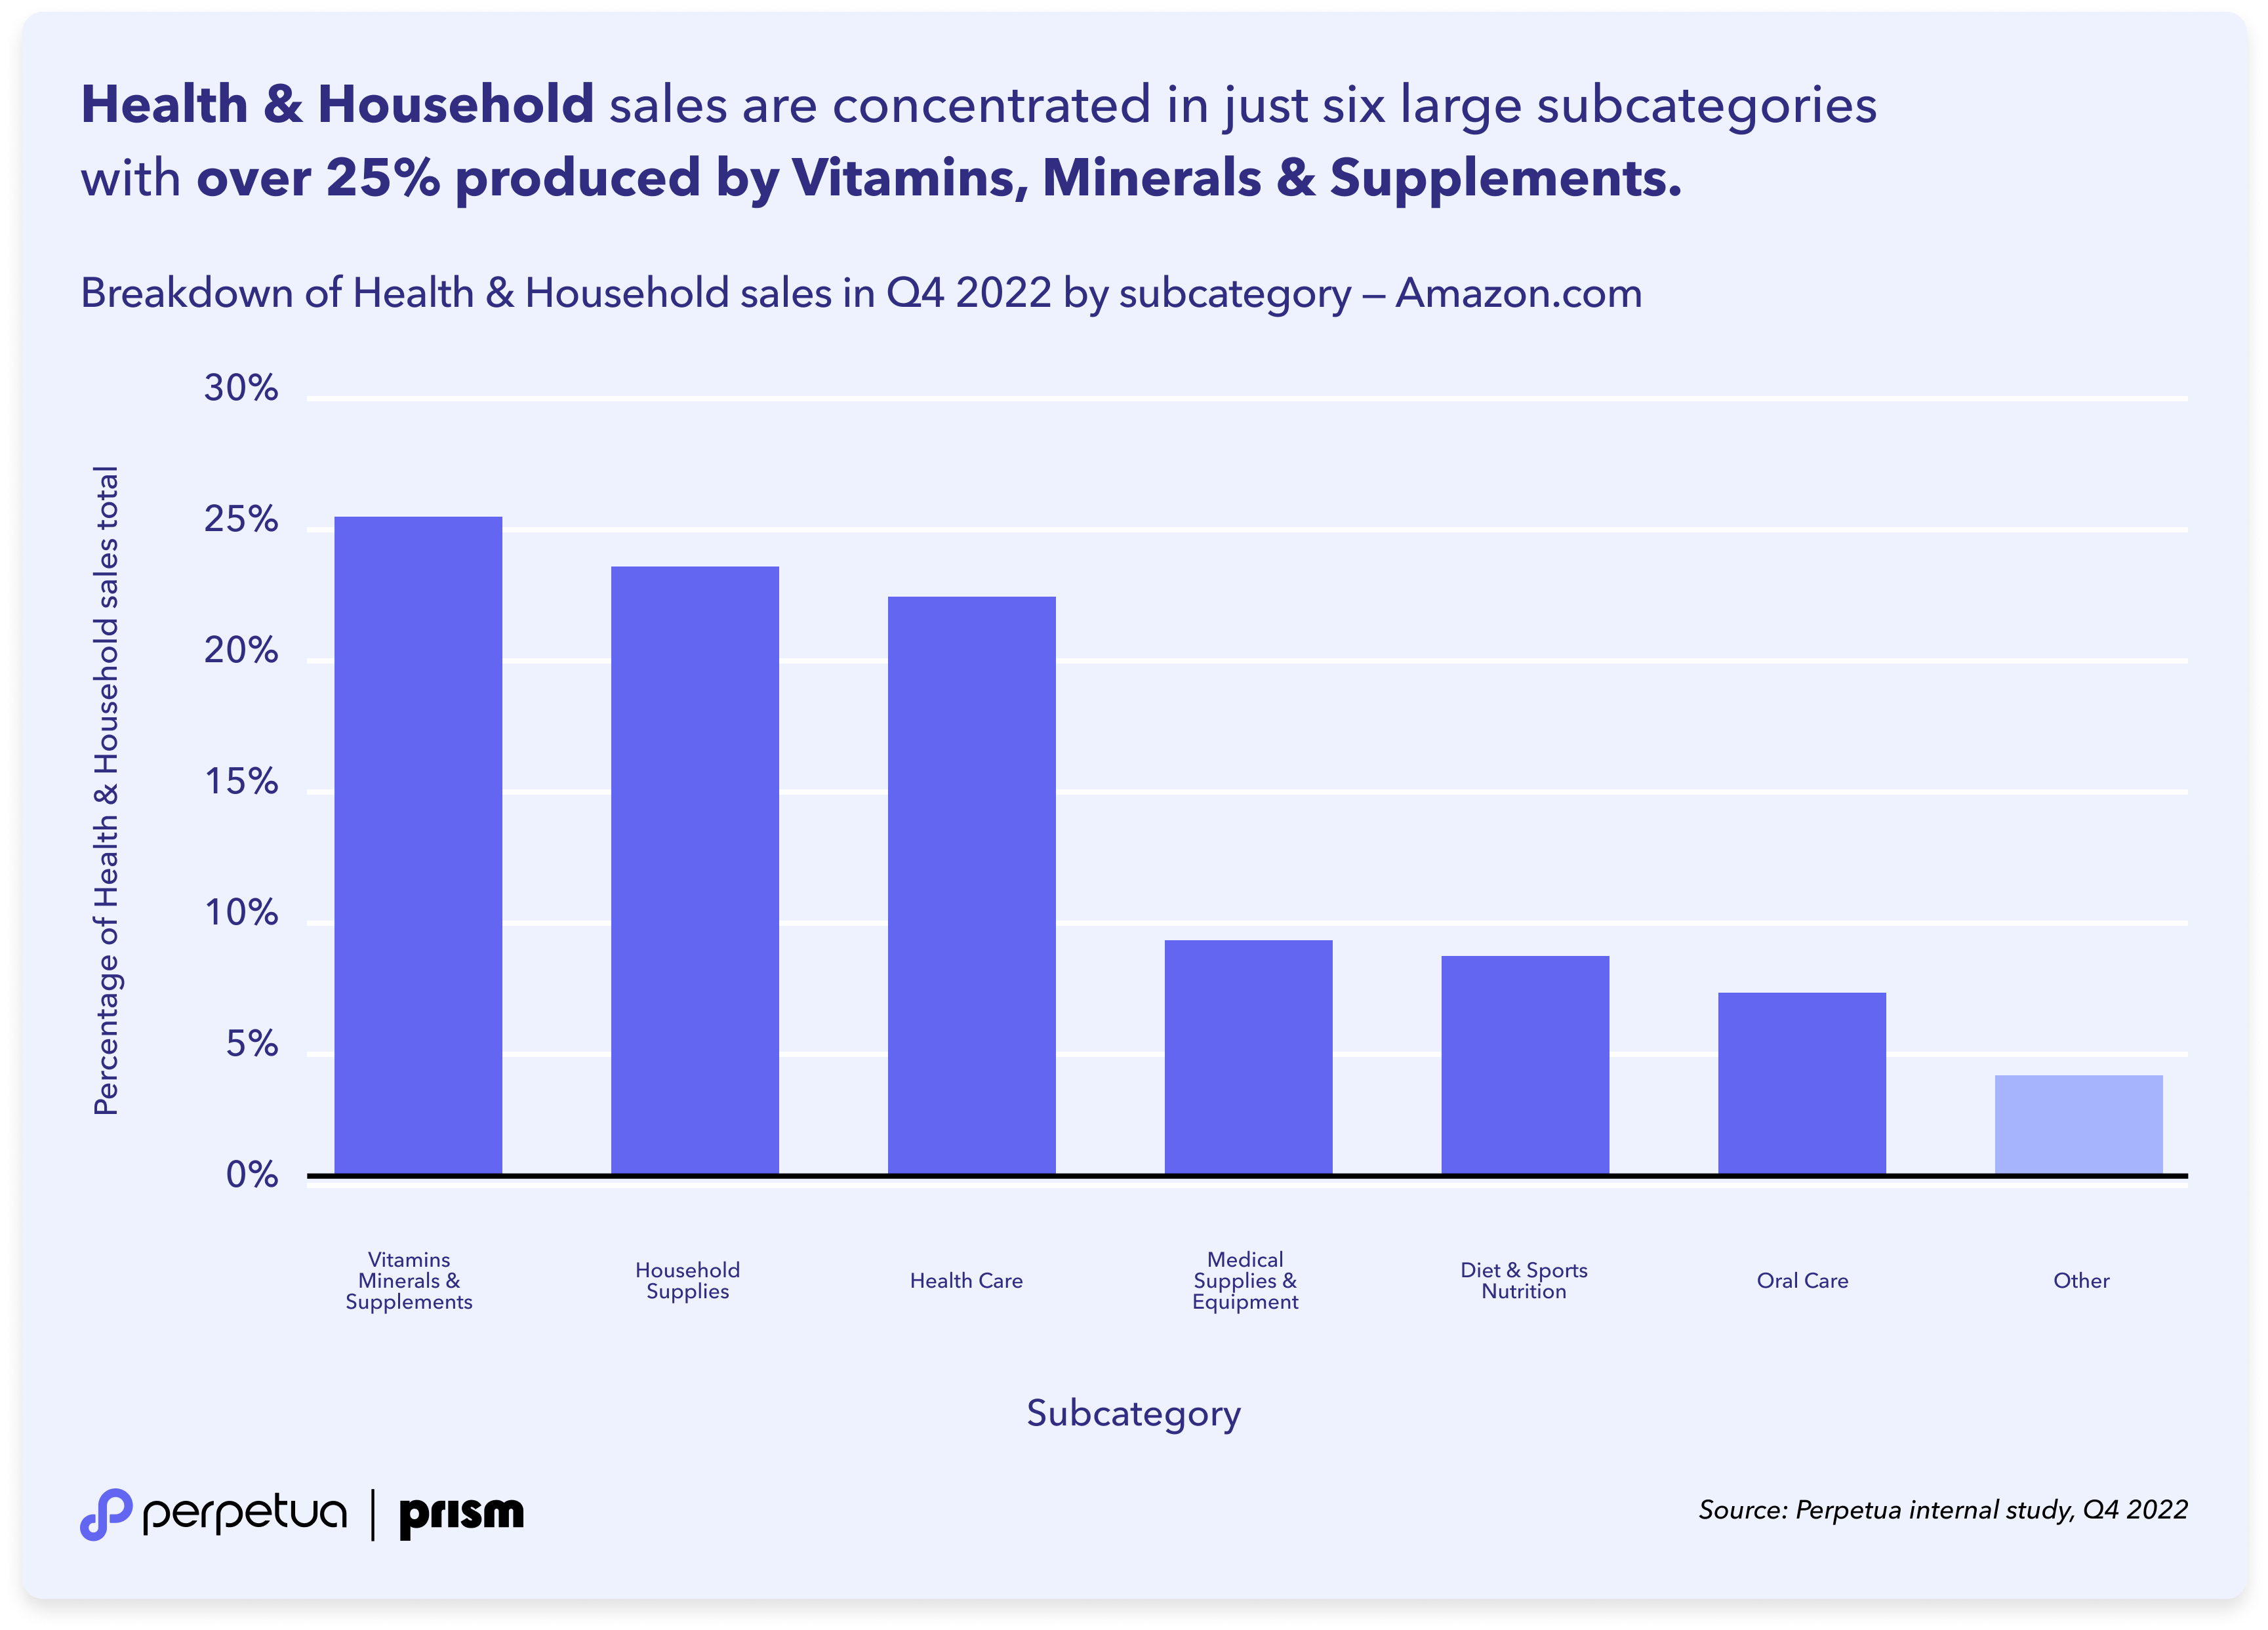 5-Perpetua Prism — Health & Household sales are concentrated in just six large subcategories with over 25- produced by Vitamins, Minerals & Supplements